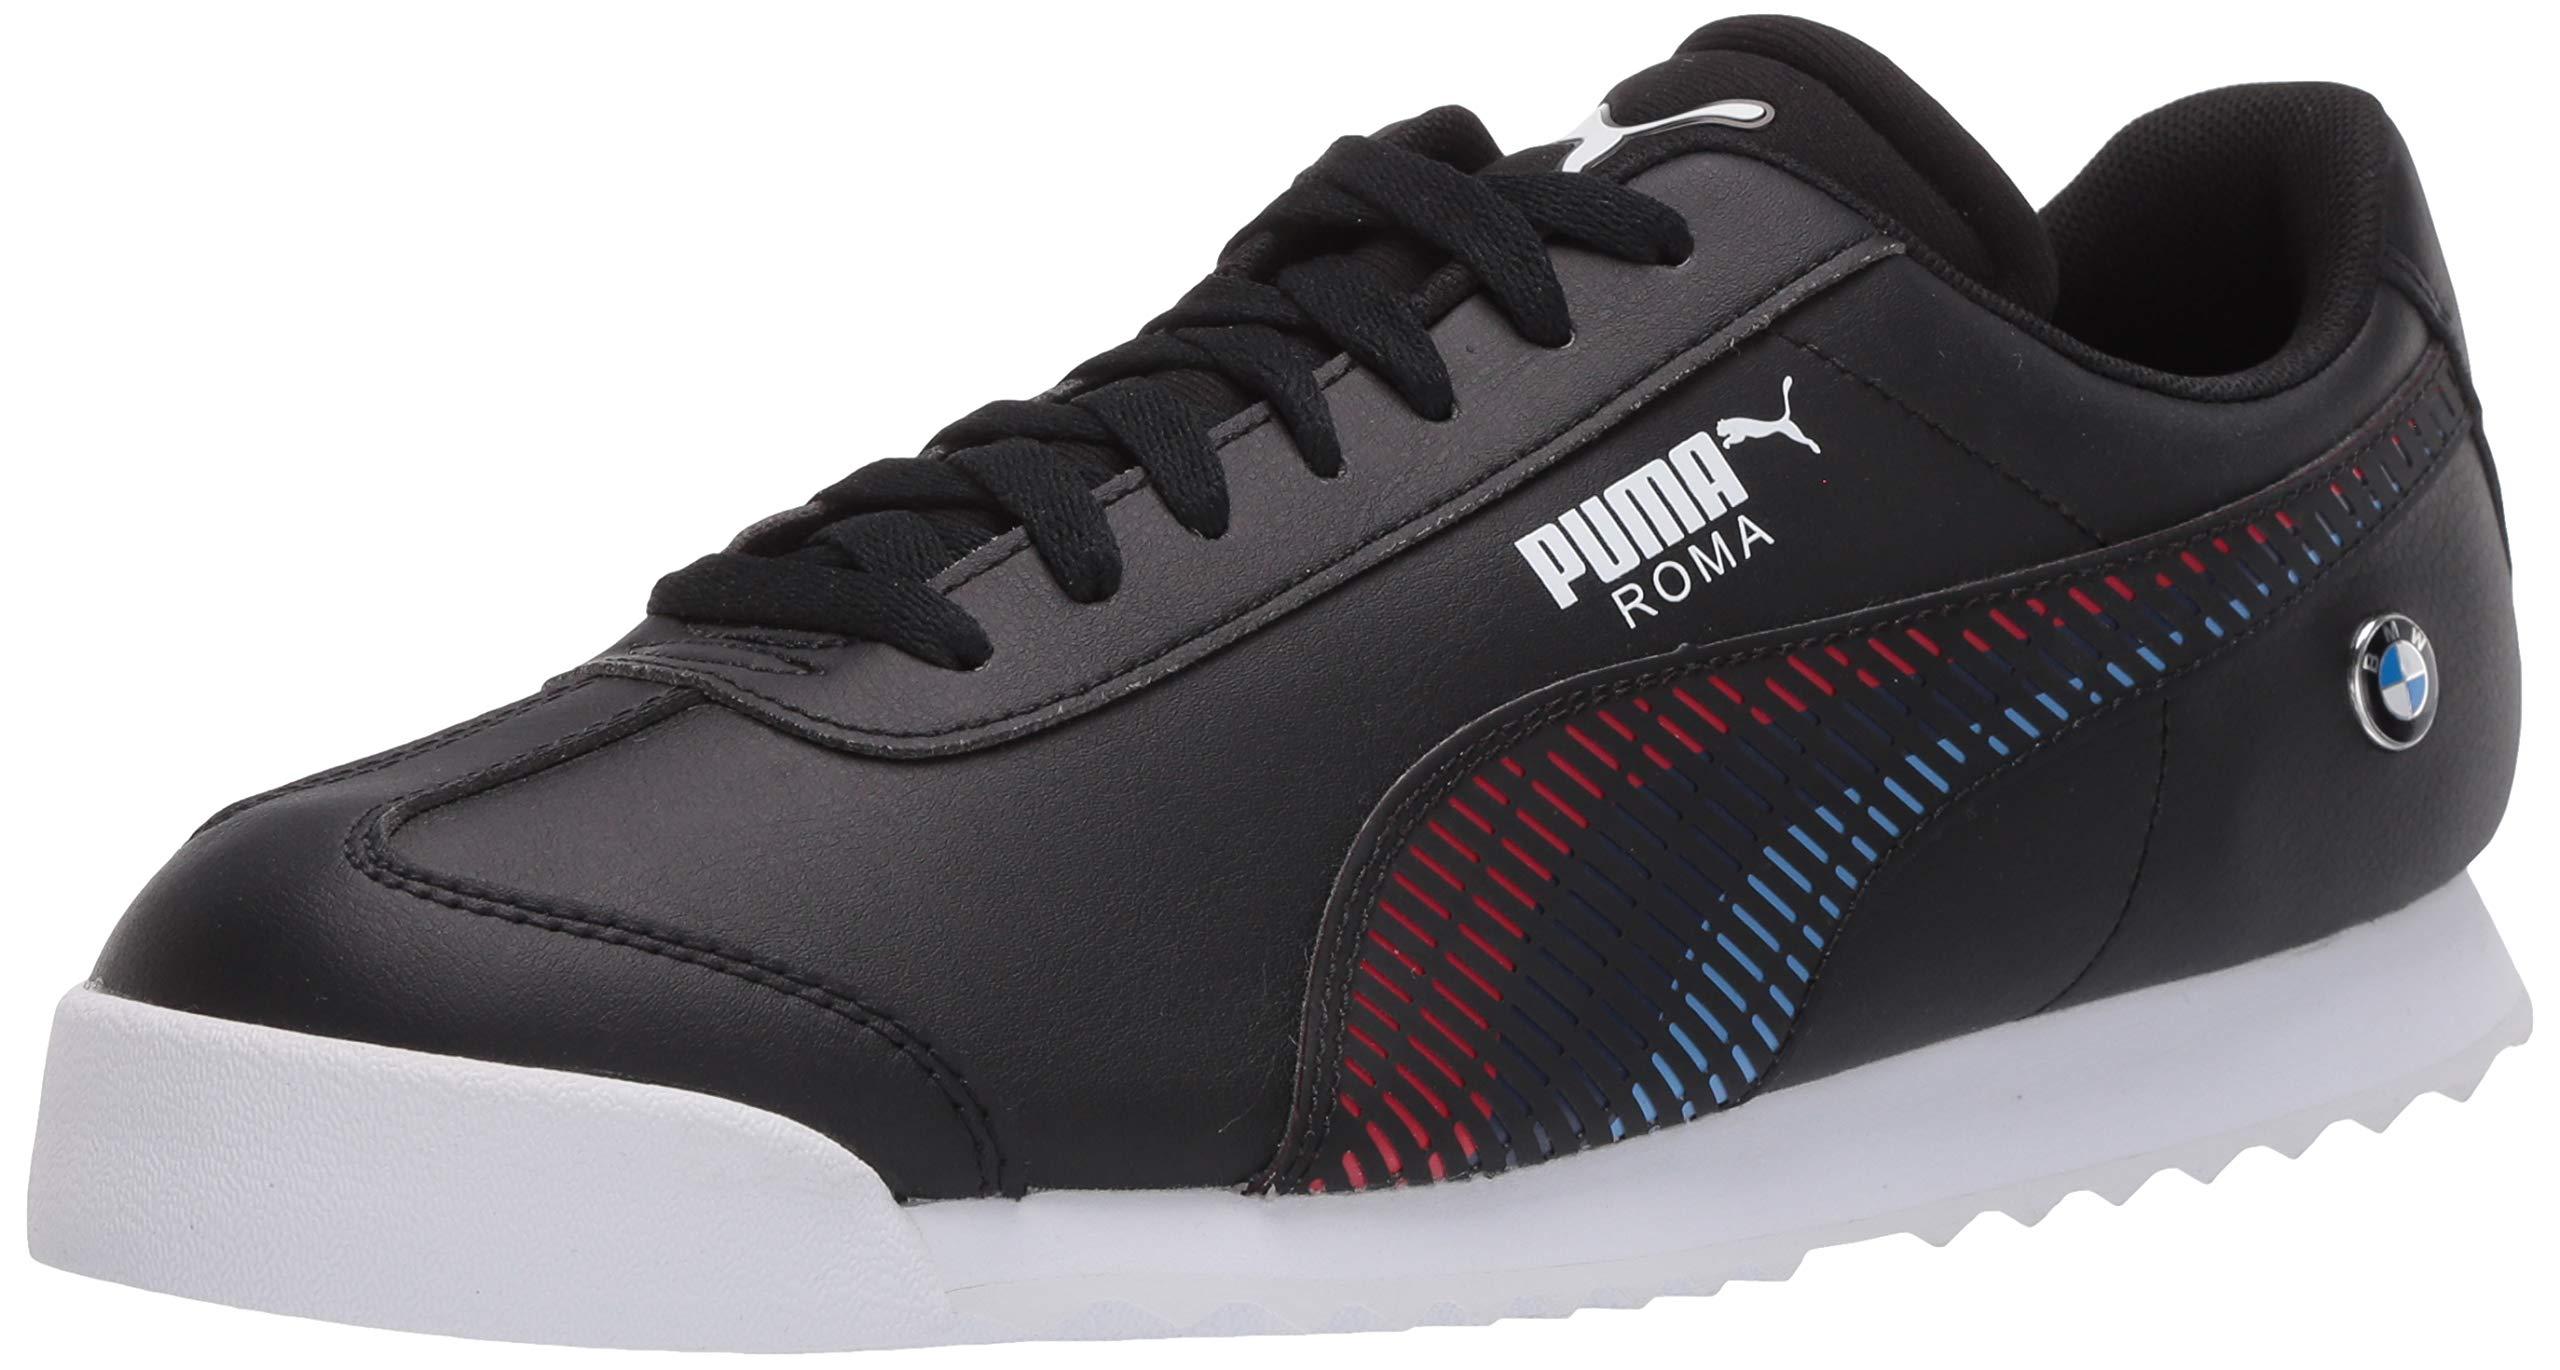 PUMA Bmw Mms Roma Sneaker in Black for Men - Save 4% - Lyst